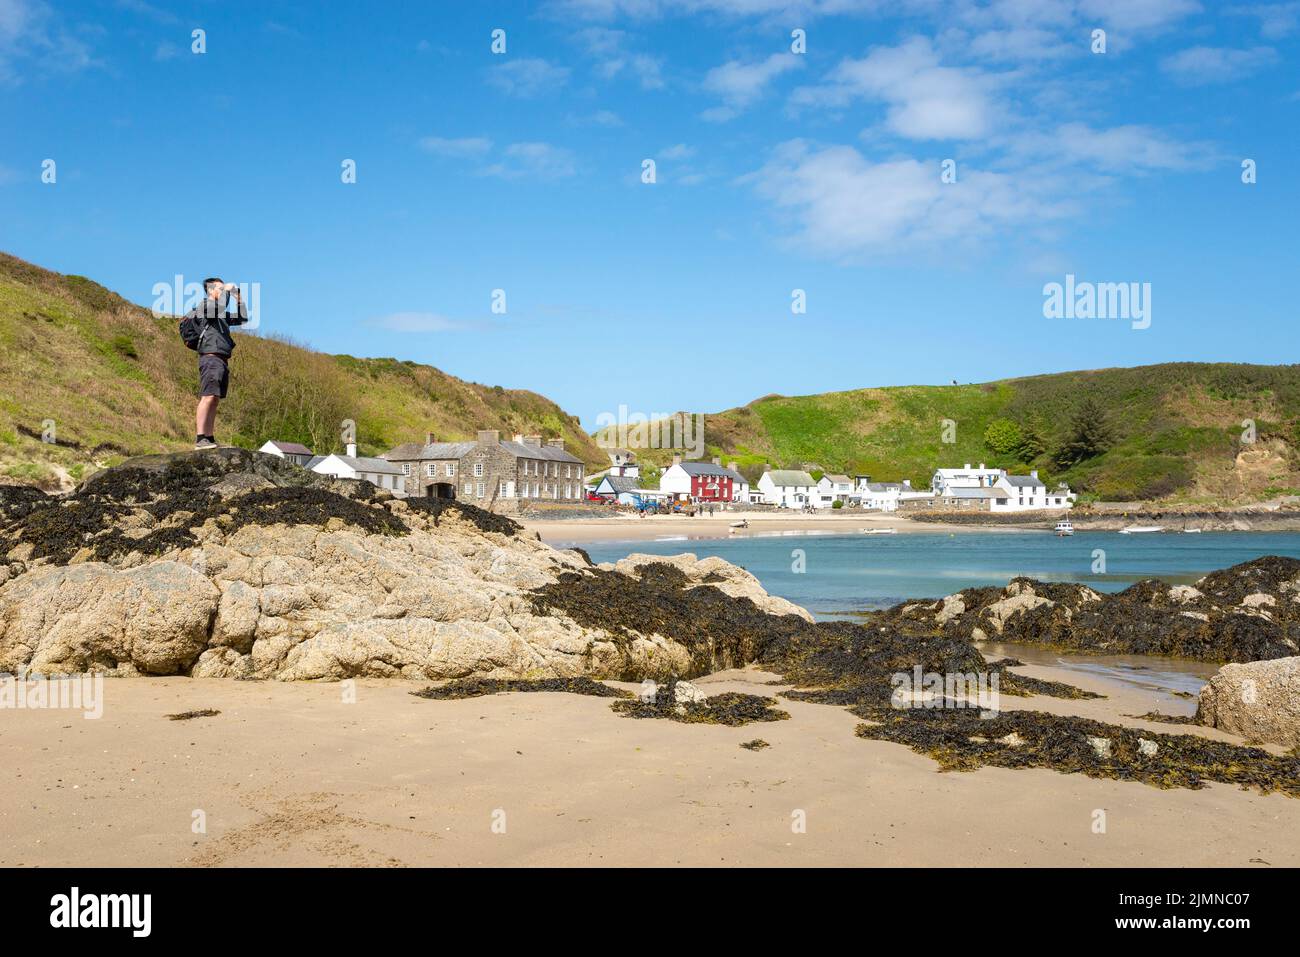 Porthdinllaen near Morfa Nefyn on the coast of North Wales. The well known Ty Coch Inn seen between the whitewashed cottages. Stock Photo